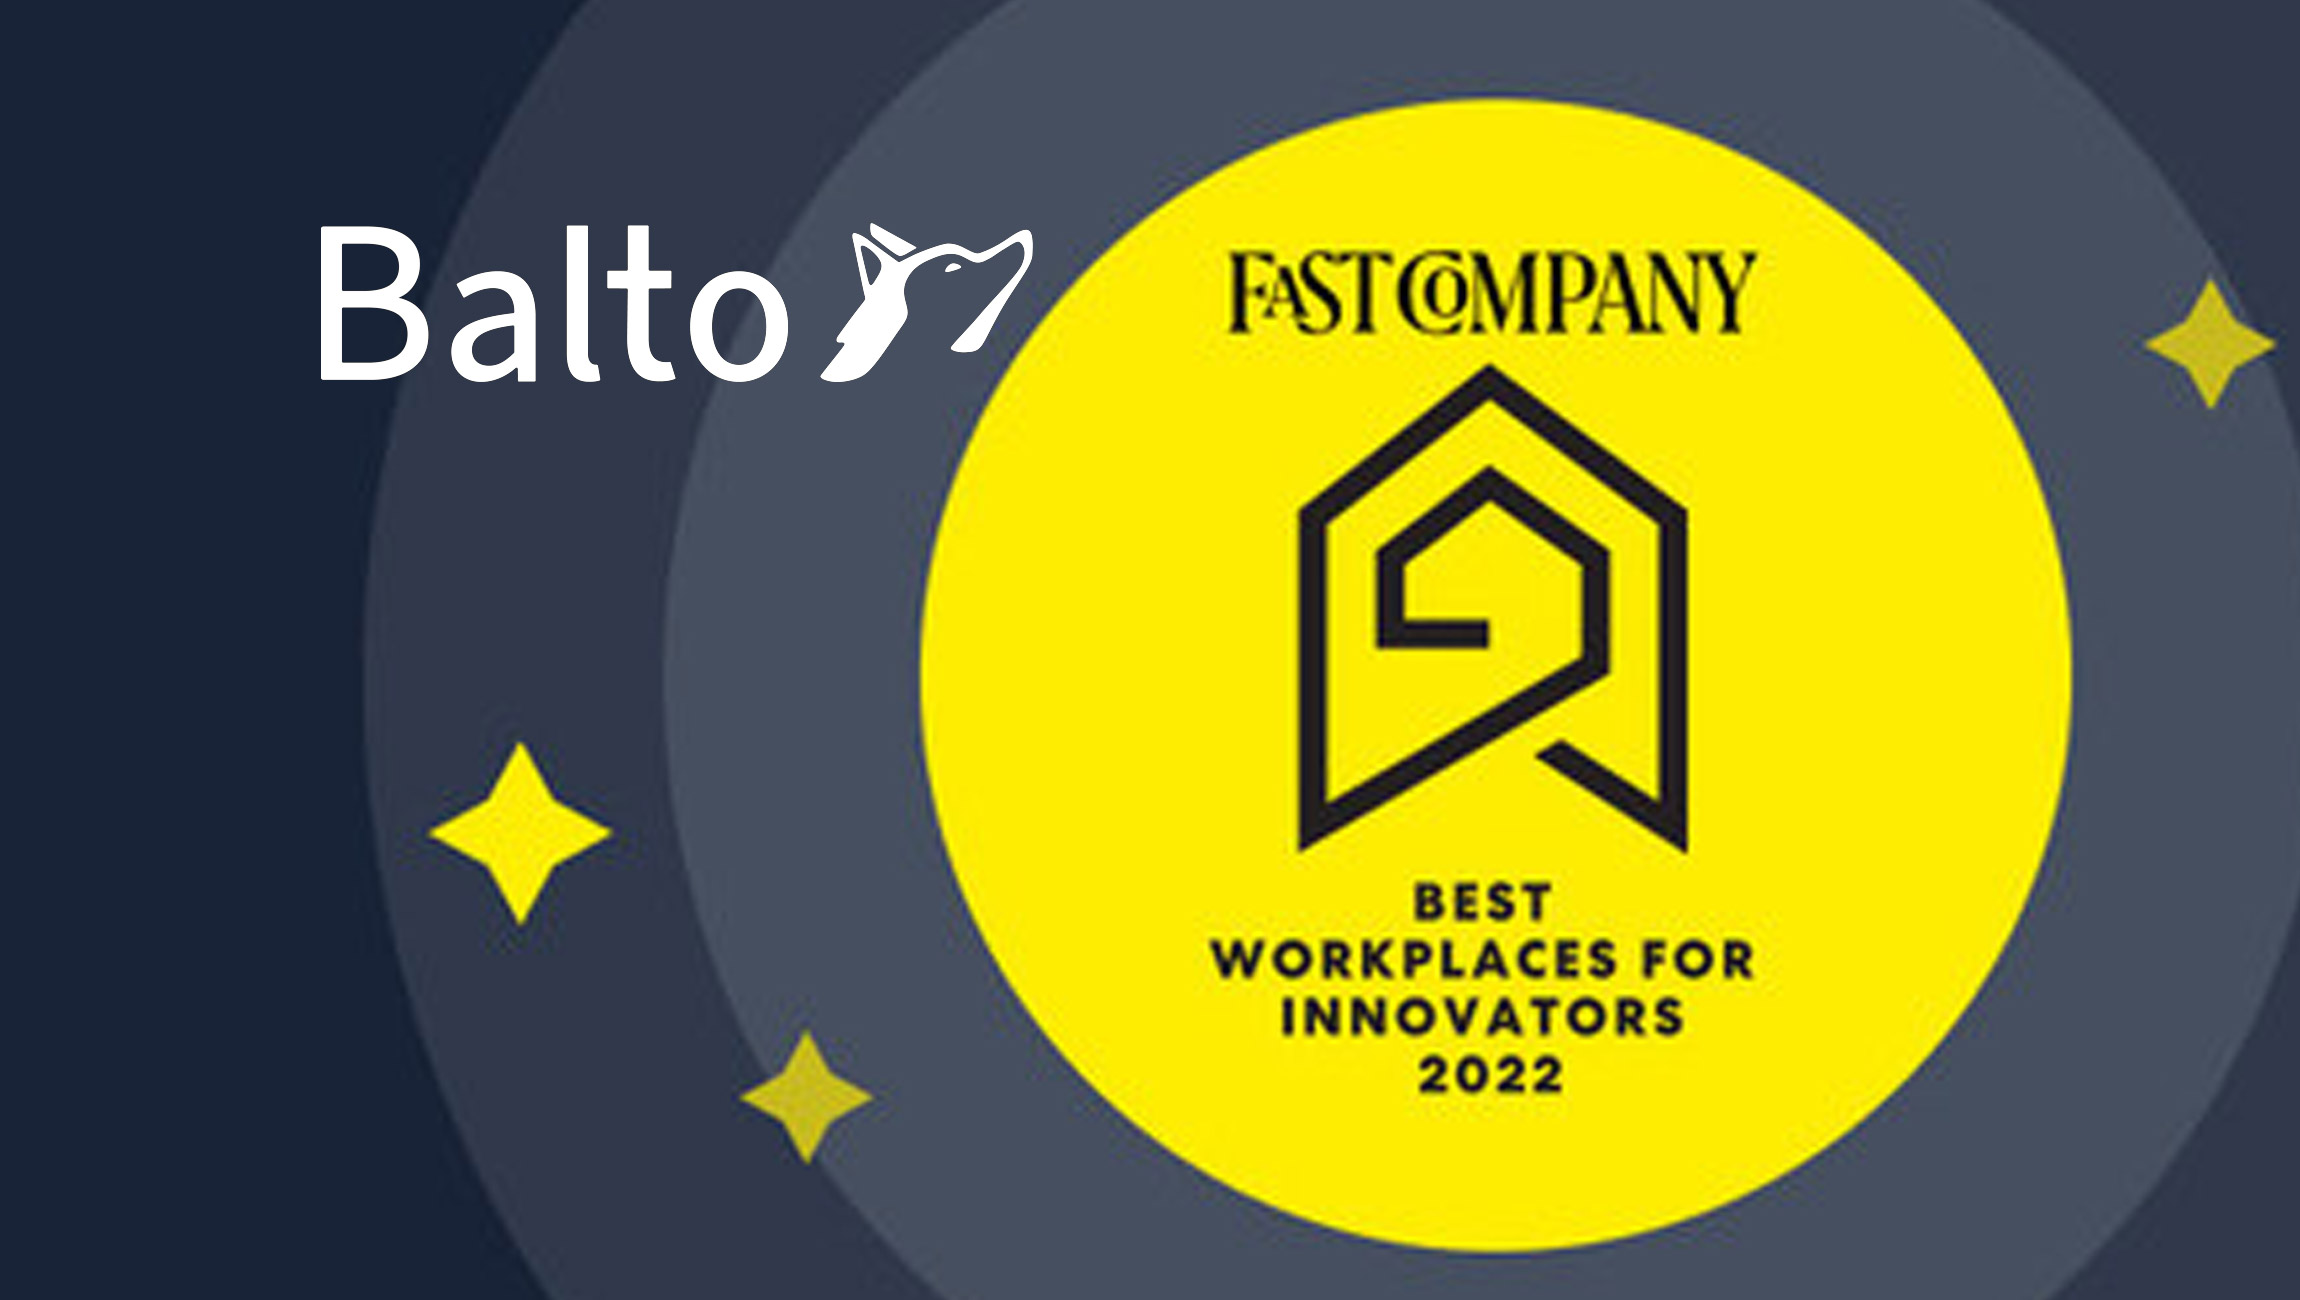 Balto Selected for Fast Company's Fourth Annual List of the Best Workplaces for Innovators in the United States